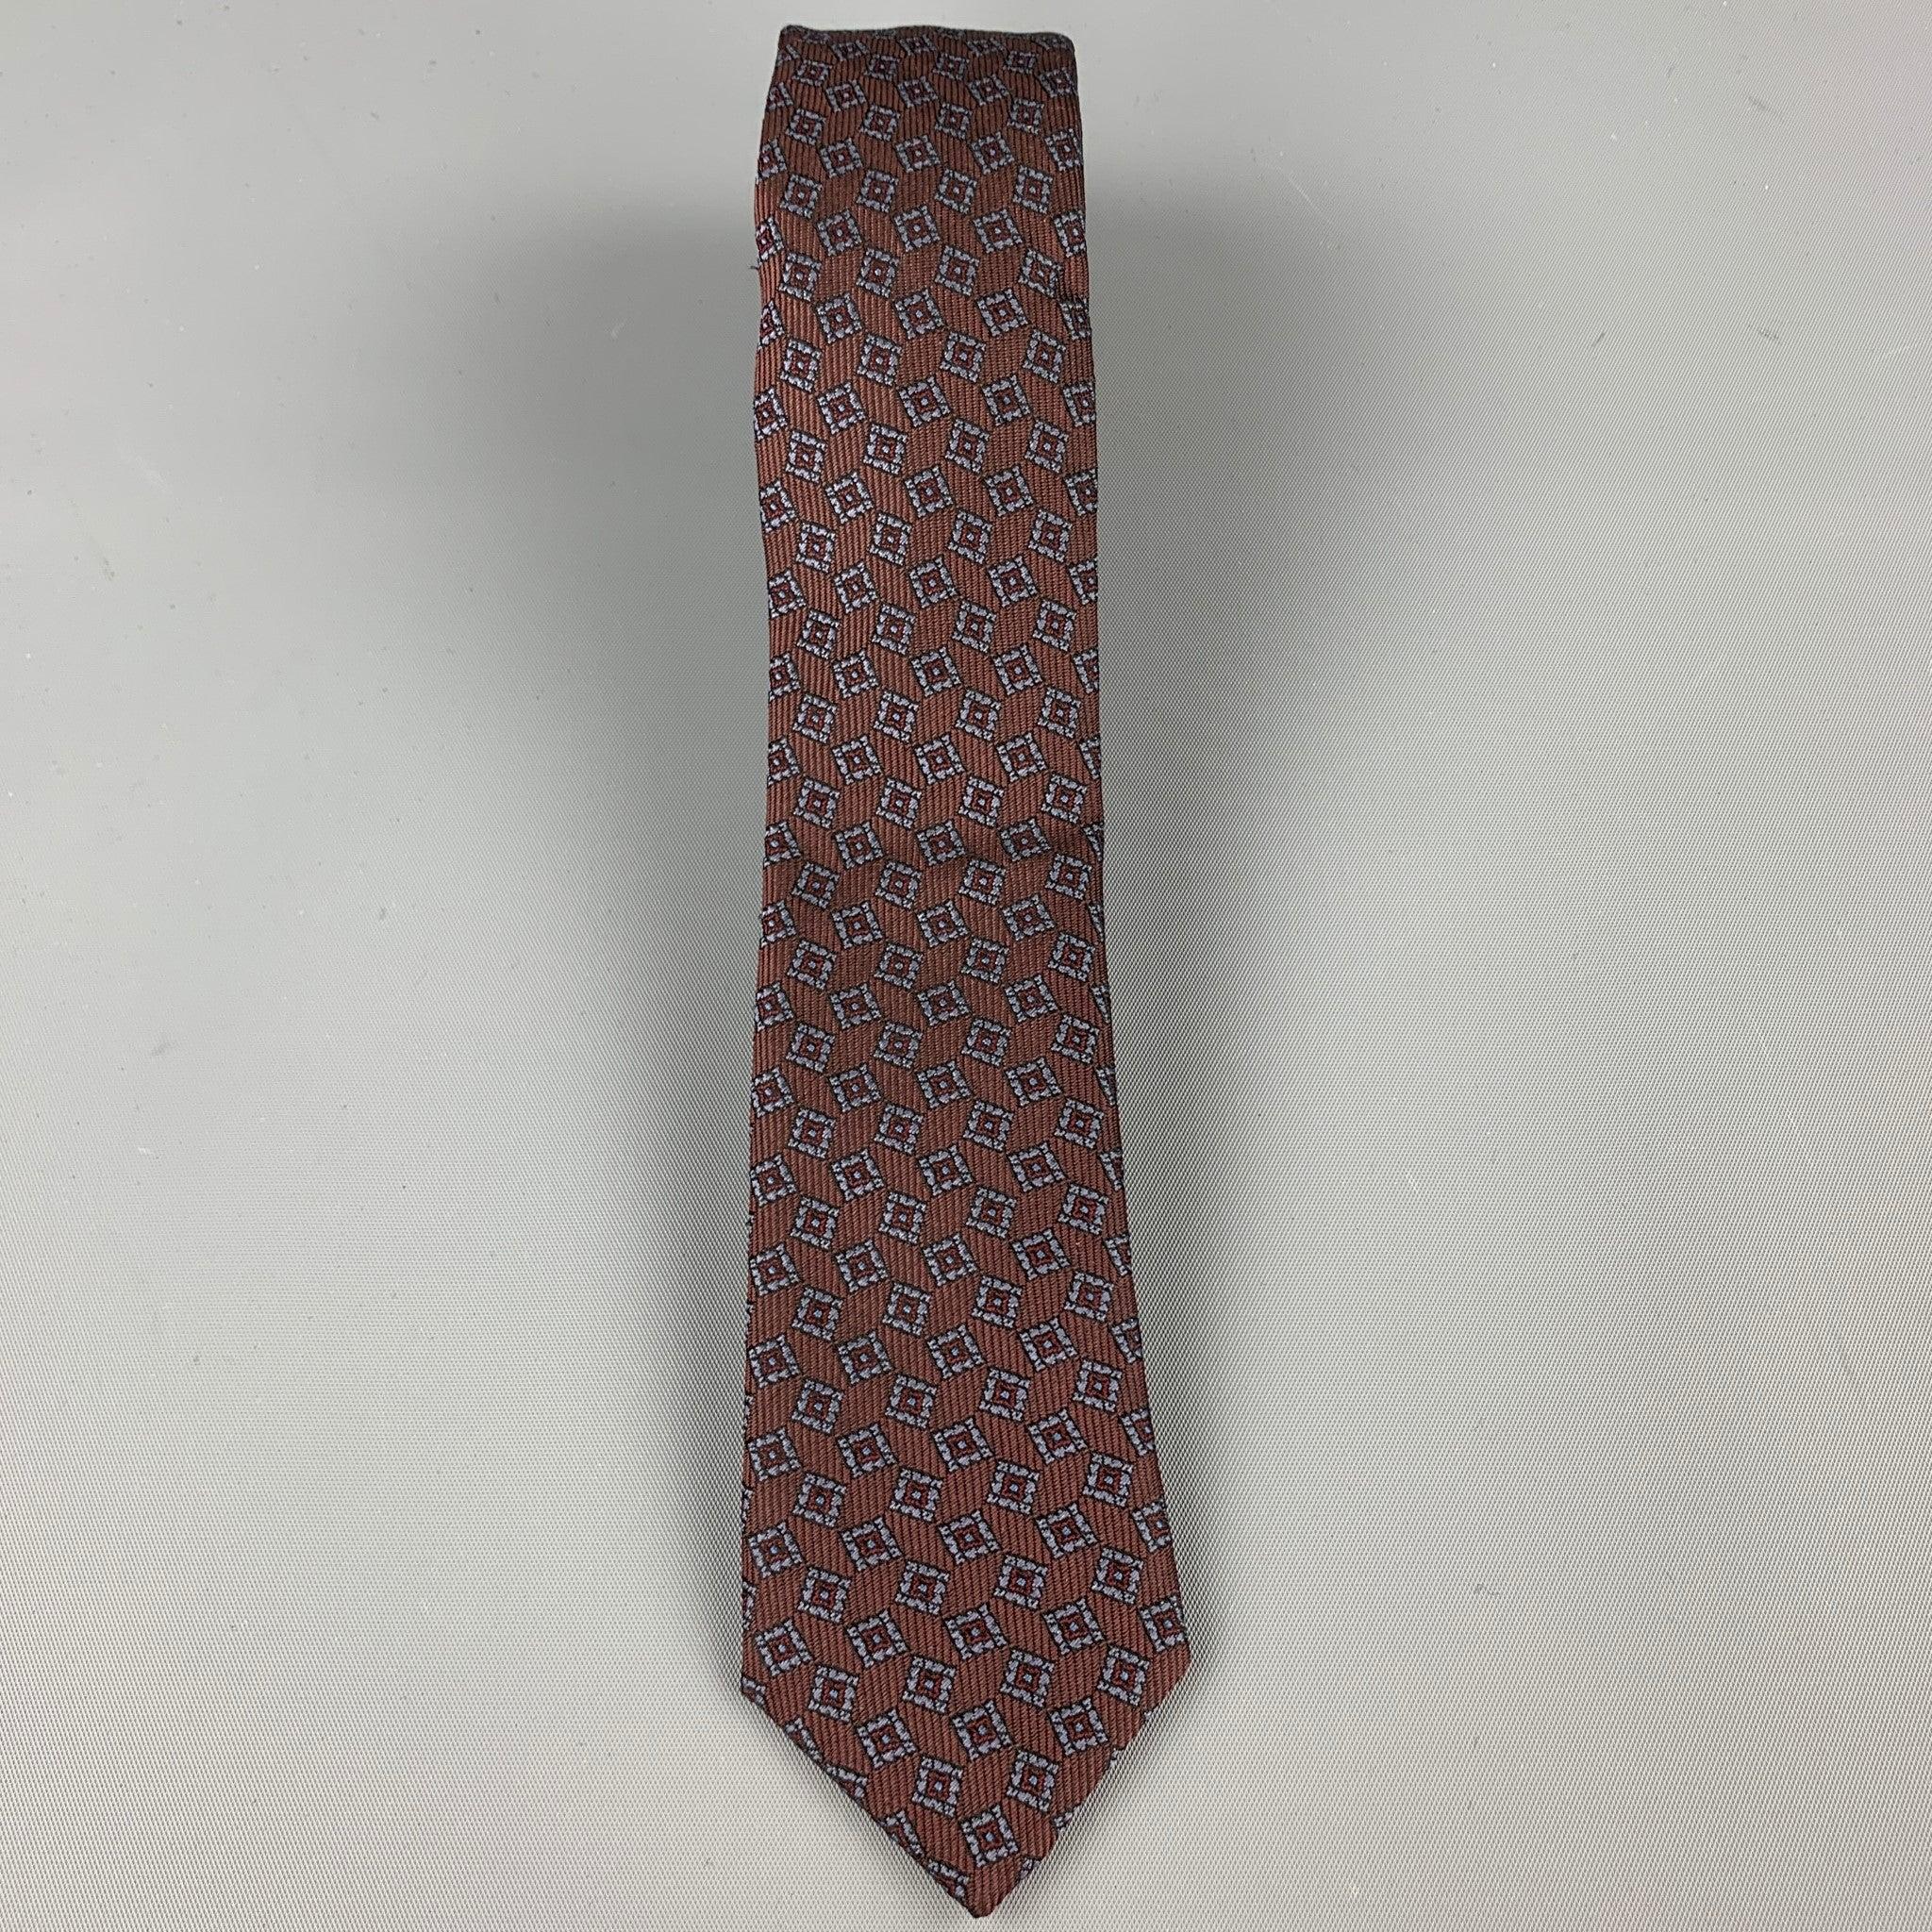 BURBERRY PRORSUM
skinny tie comes in taupe brown silk with navy geometric squares print.
 Made in England.Very Good Pre-Owned Condition.
Width: 2 inches 
  
  
Reference: 68465
Category: Tie
More Details
    
Brand:  BURBERRY PRORSUM
Color: 